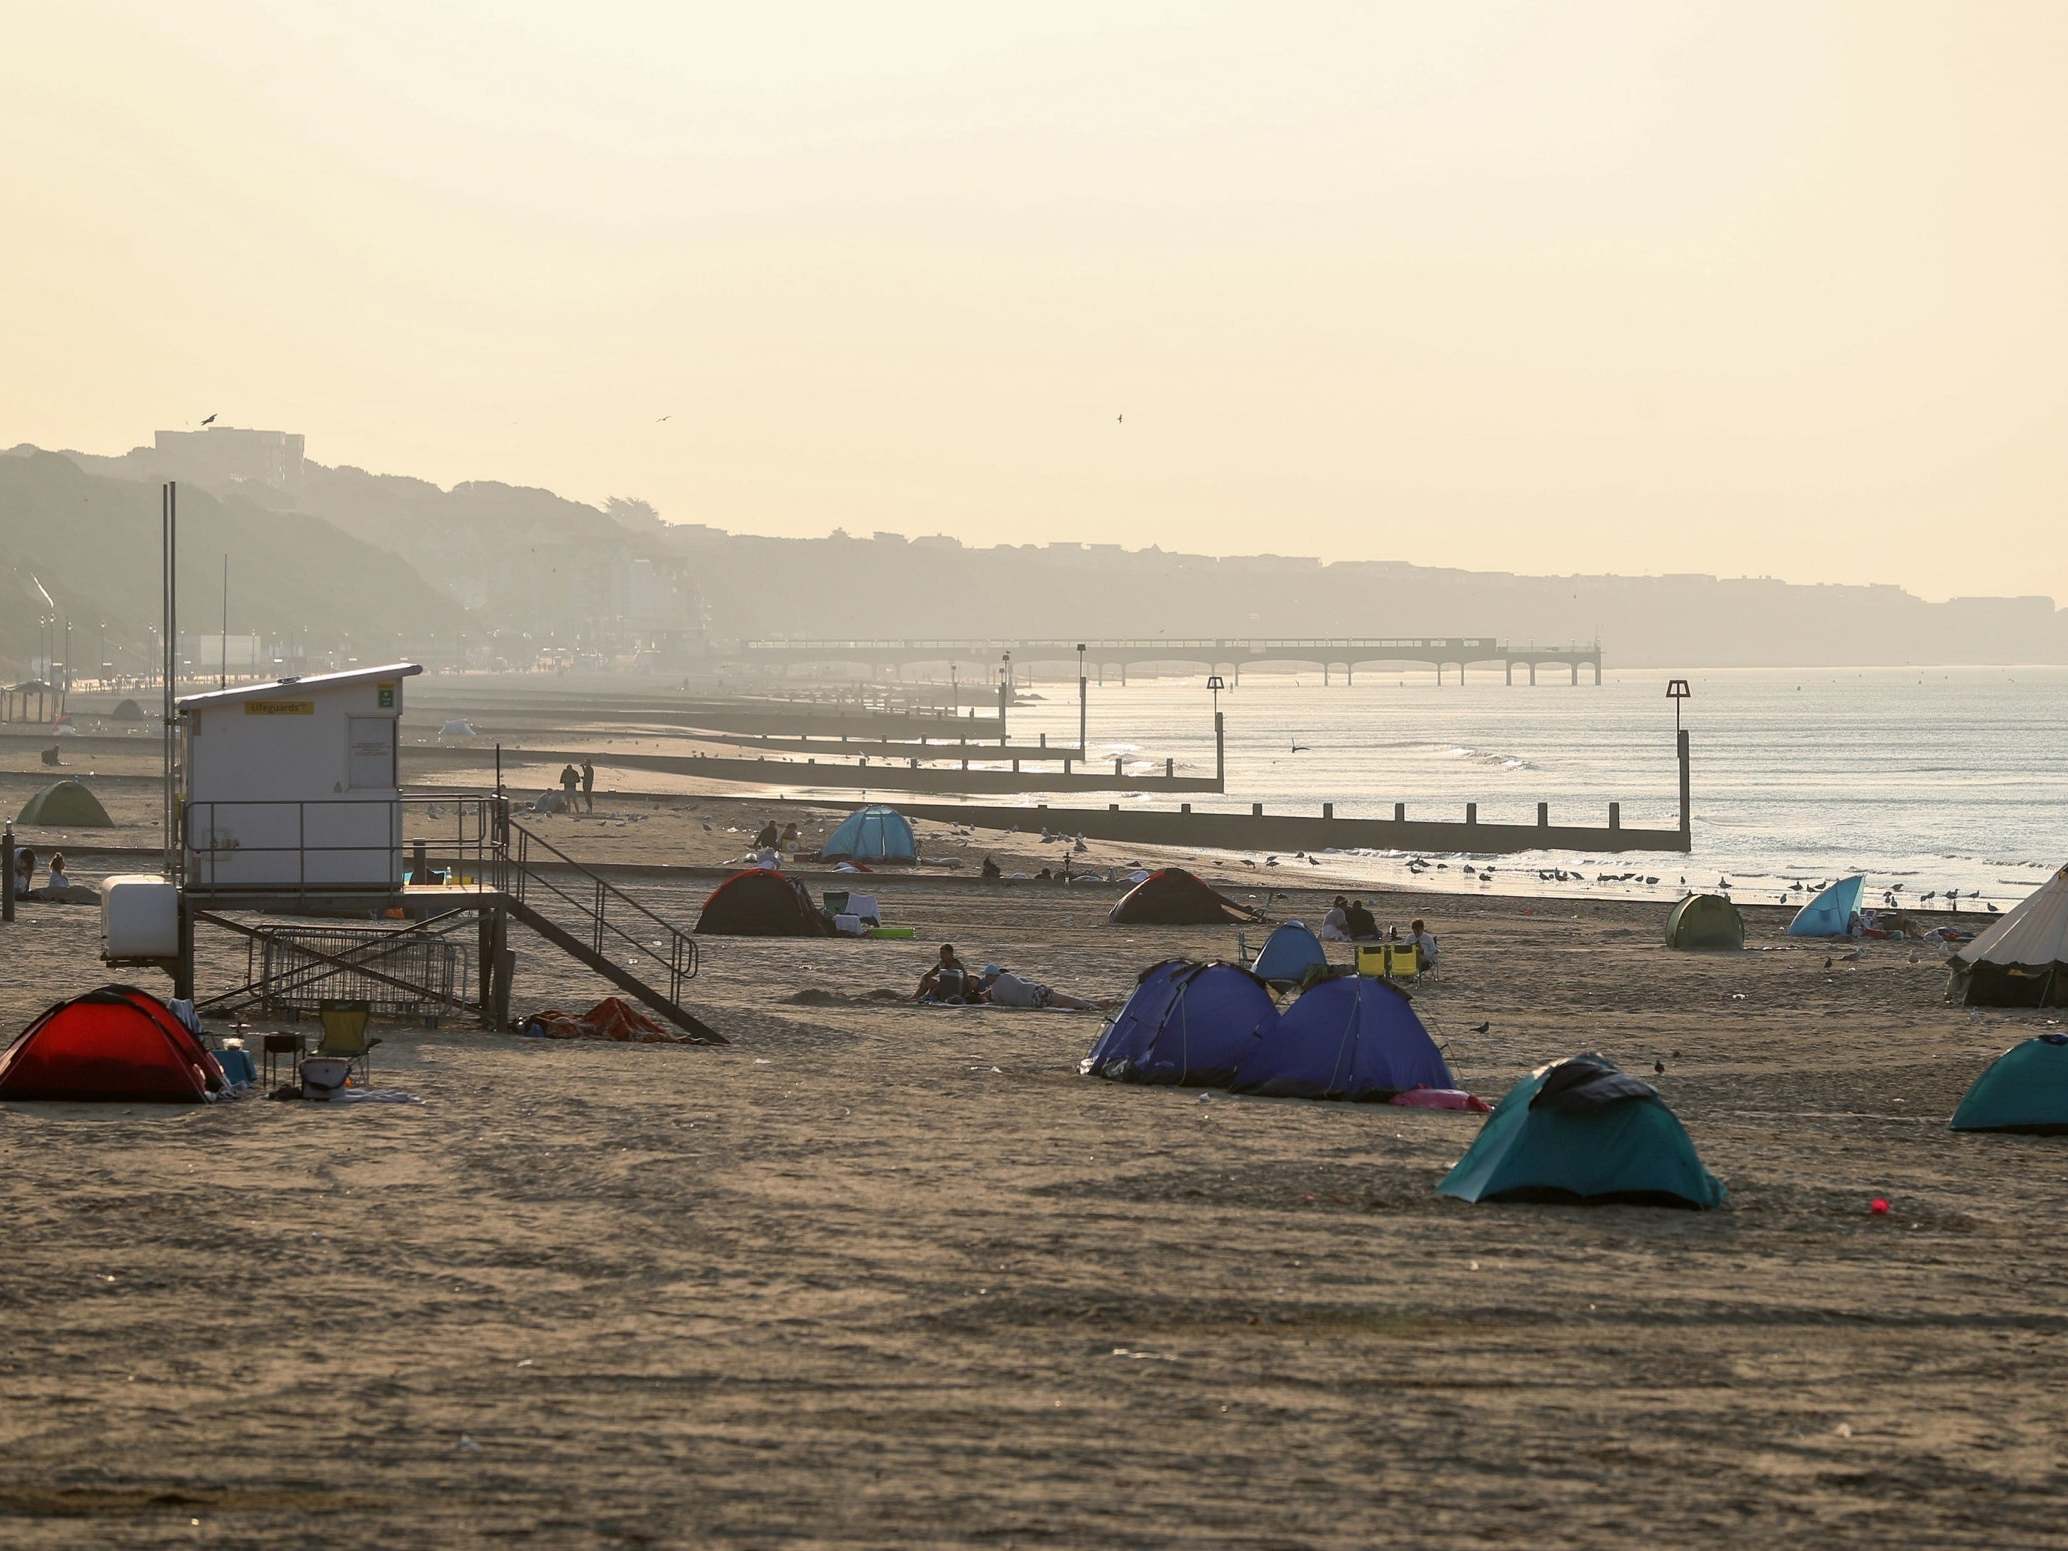 Tents pitched up on Bournemouth beach in Dorset as the sun rises